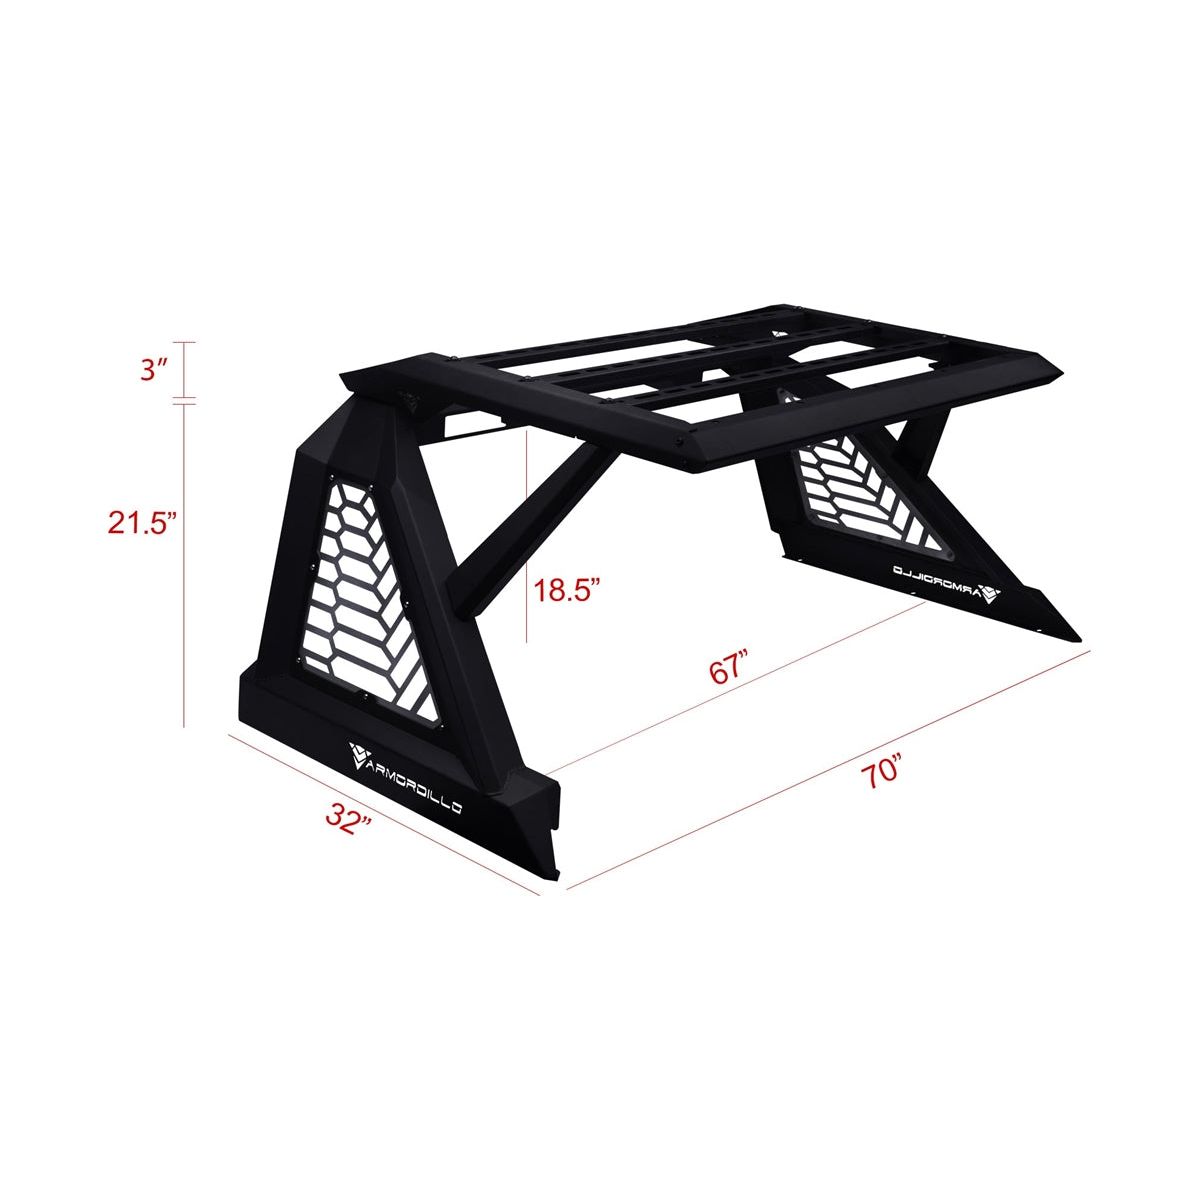 Armordillo CR-X Chase Rack Fits Full Size Trucks (Excludes all DODGE RAMS, F250-350-450-550)